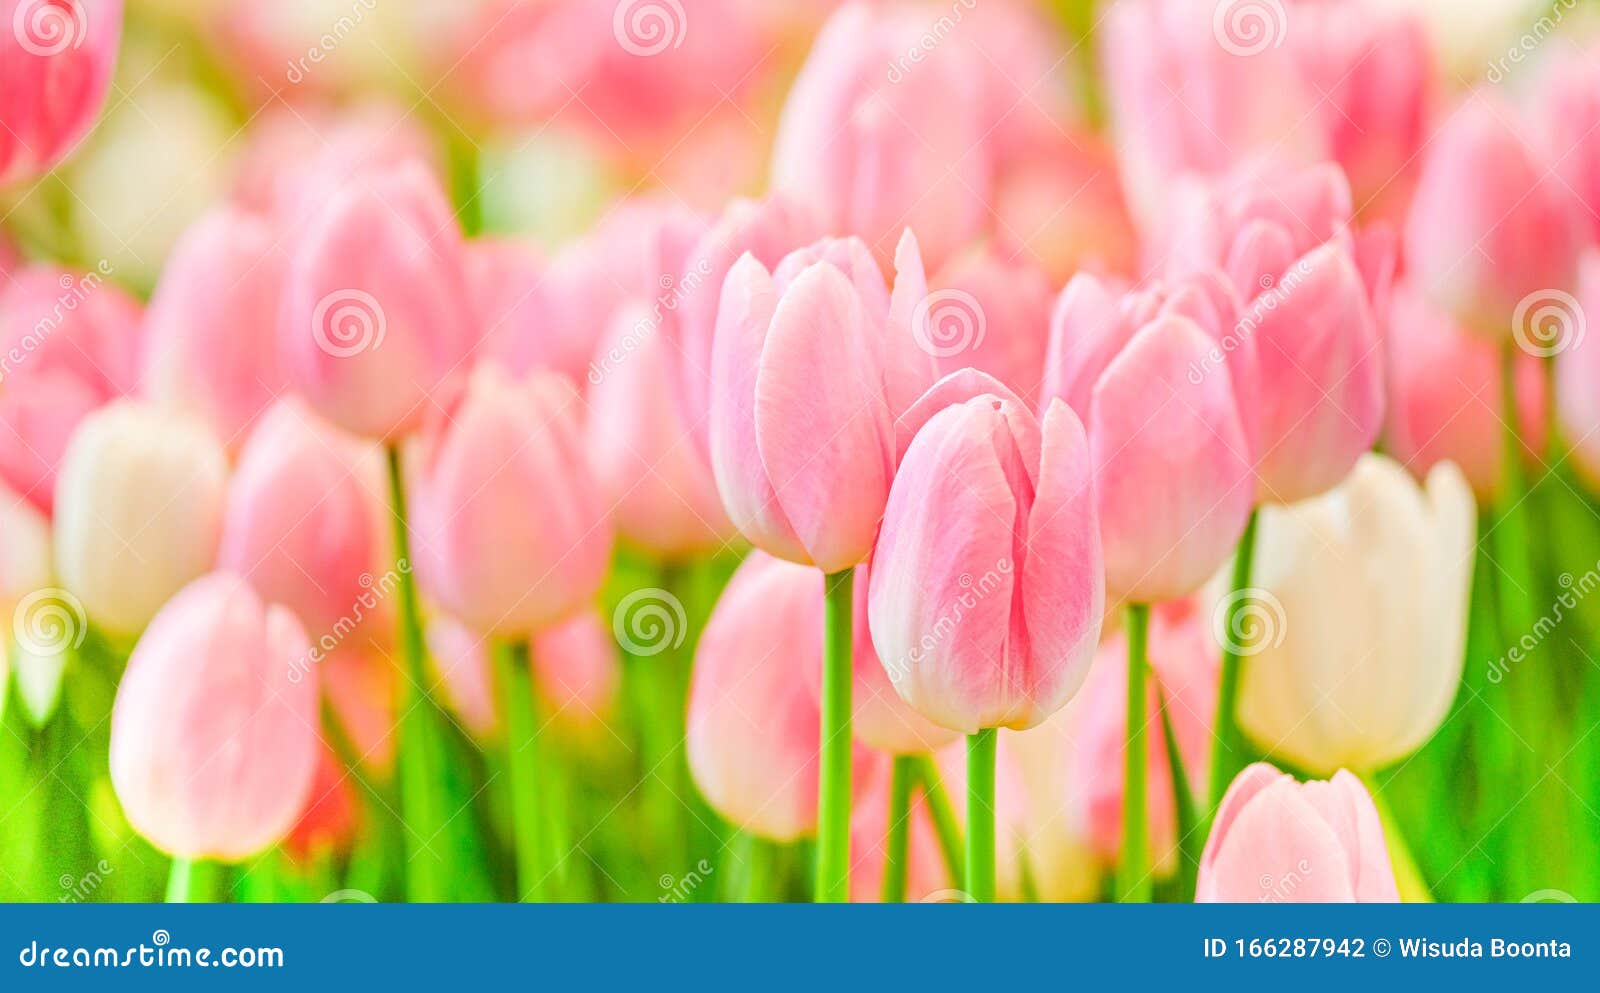 The Beautiful Tulip Flowers in the Garden Using As the Nature Background  and Spring Season Wallpaper Concept Stock Photo - Image of bunch,  invitation: 166287942